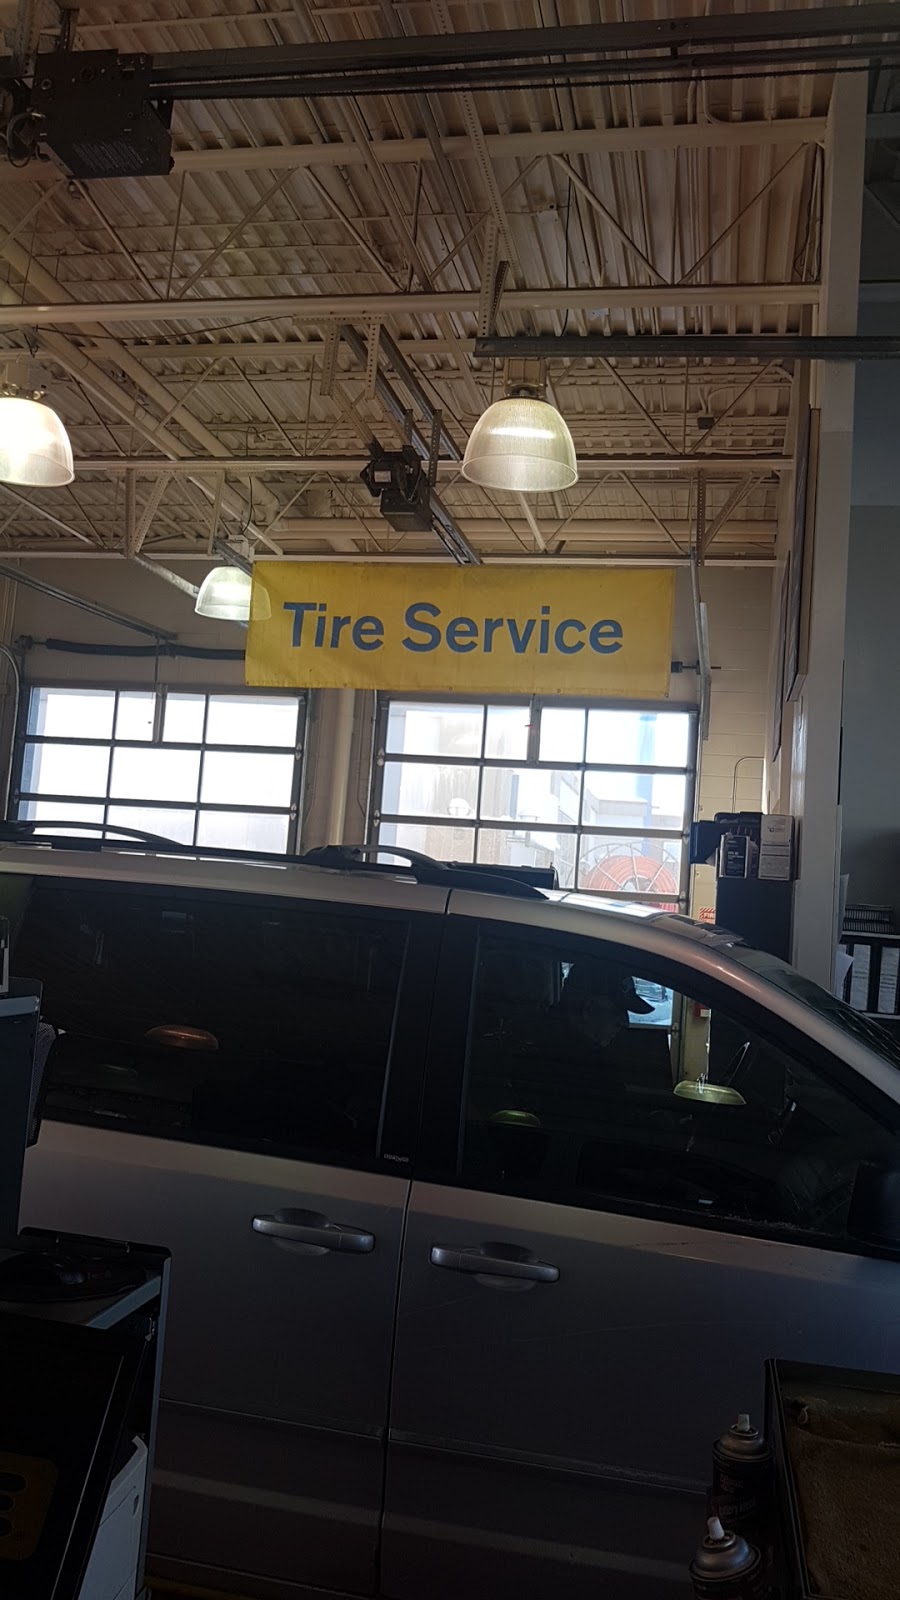 Mr. Lube | 4307 130 Ave SE Suite 200, Calgary, AB T2Z 3V8, Canada | Phone: (403) 257-4617